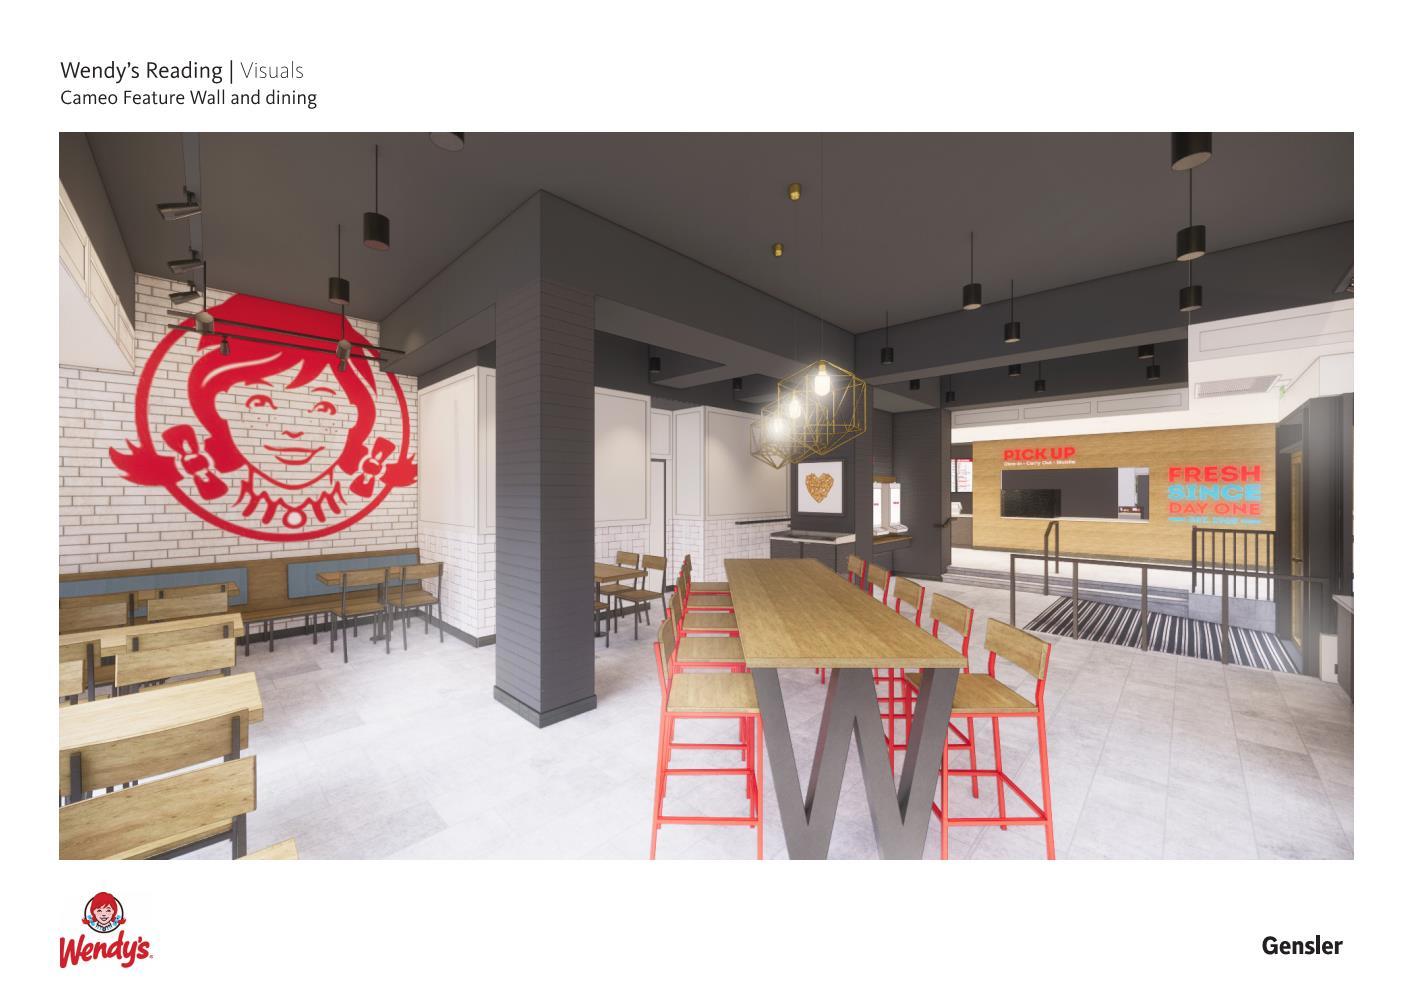 FIRST LOOK pictures of new Wendys to open in Reading. Pics by Wendys